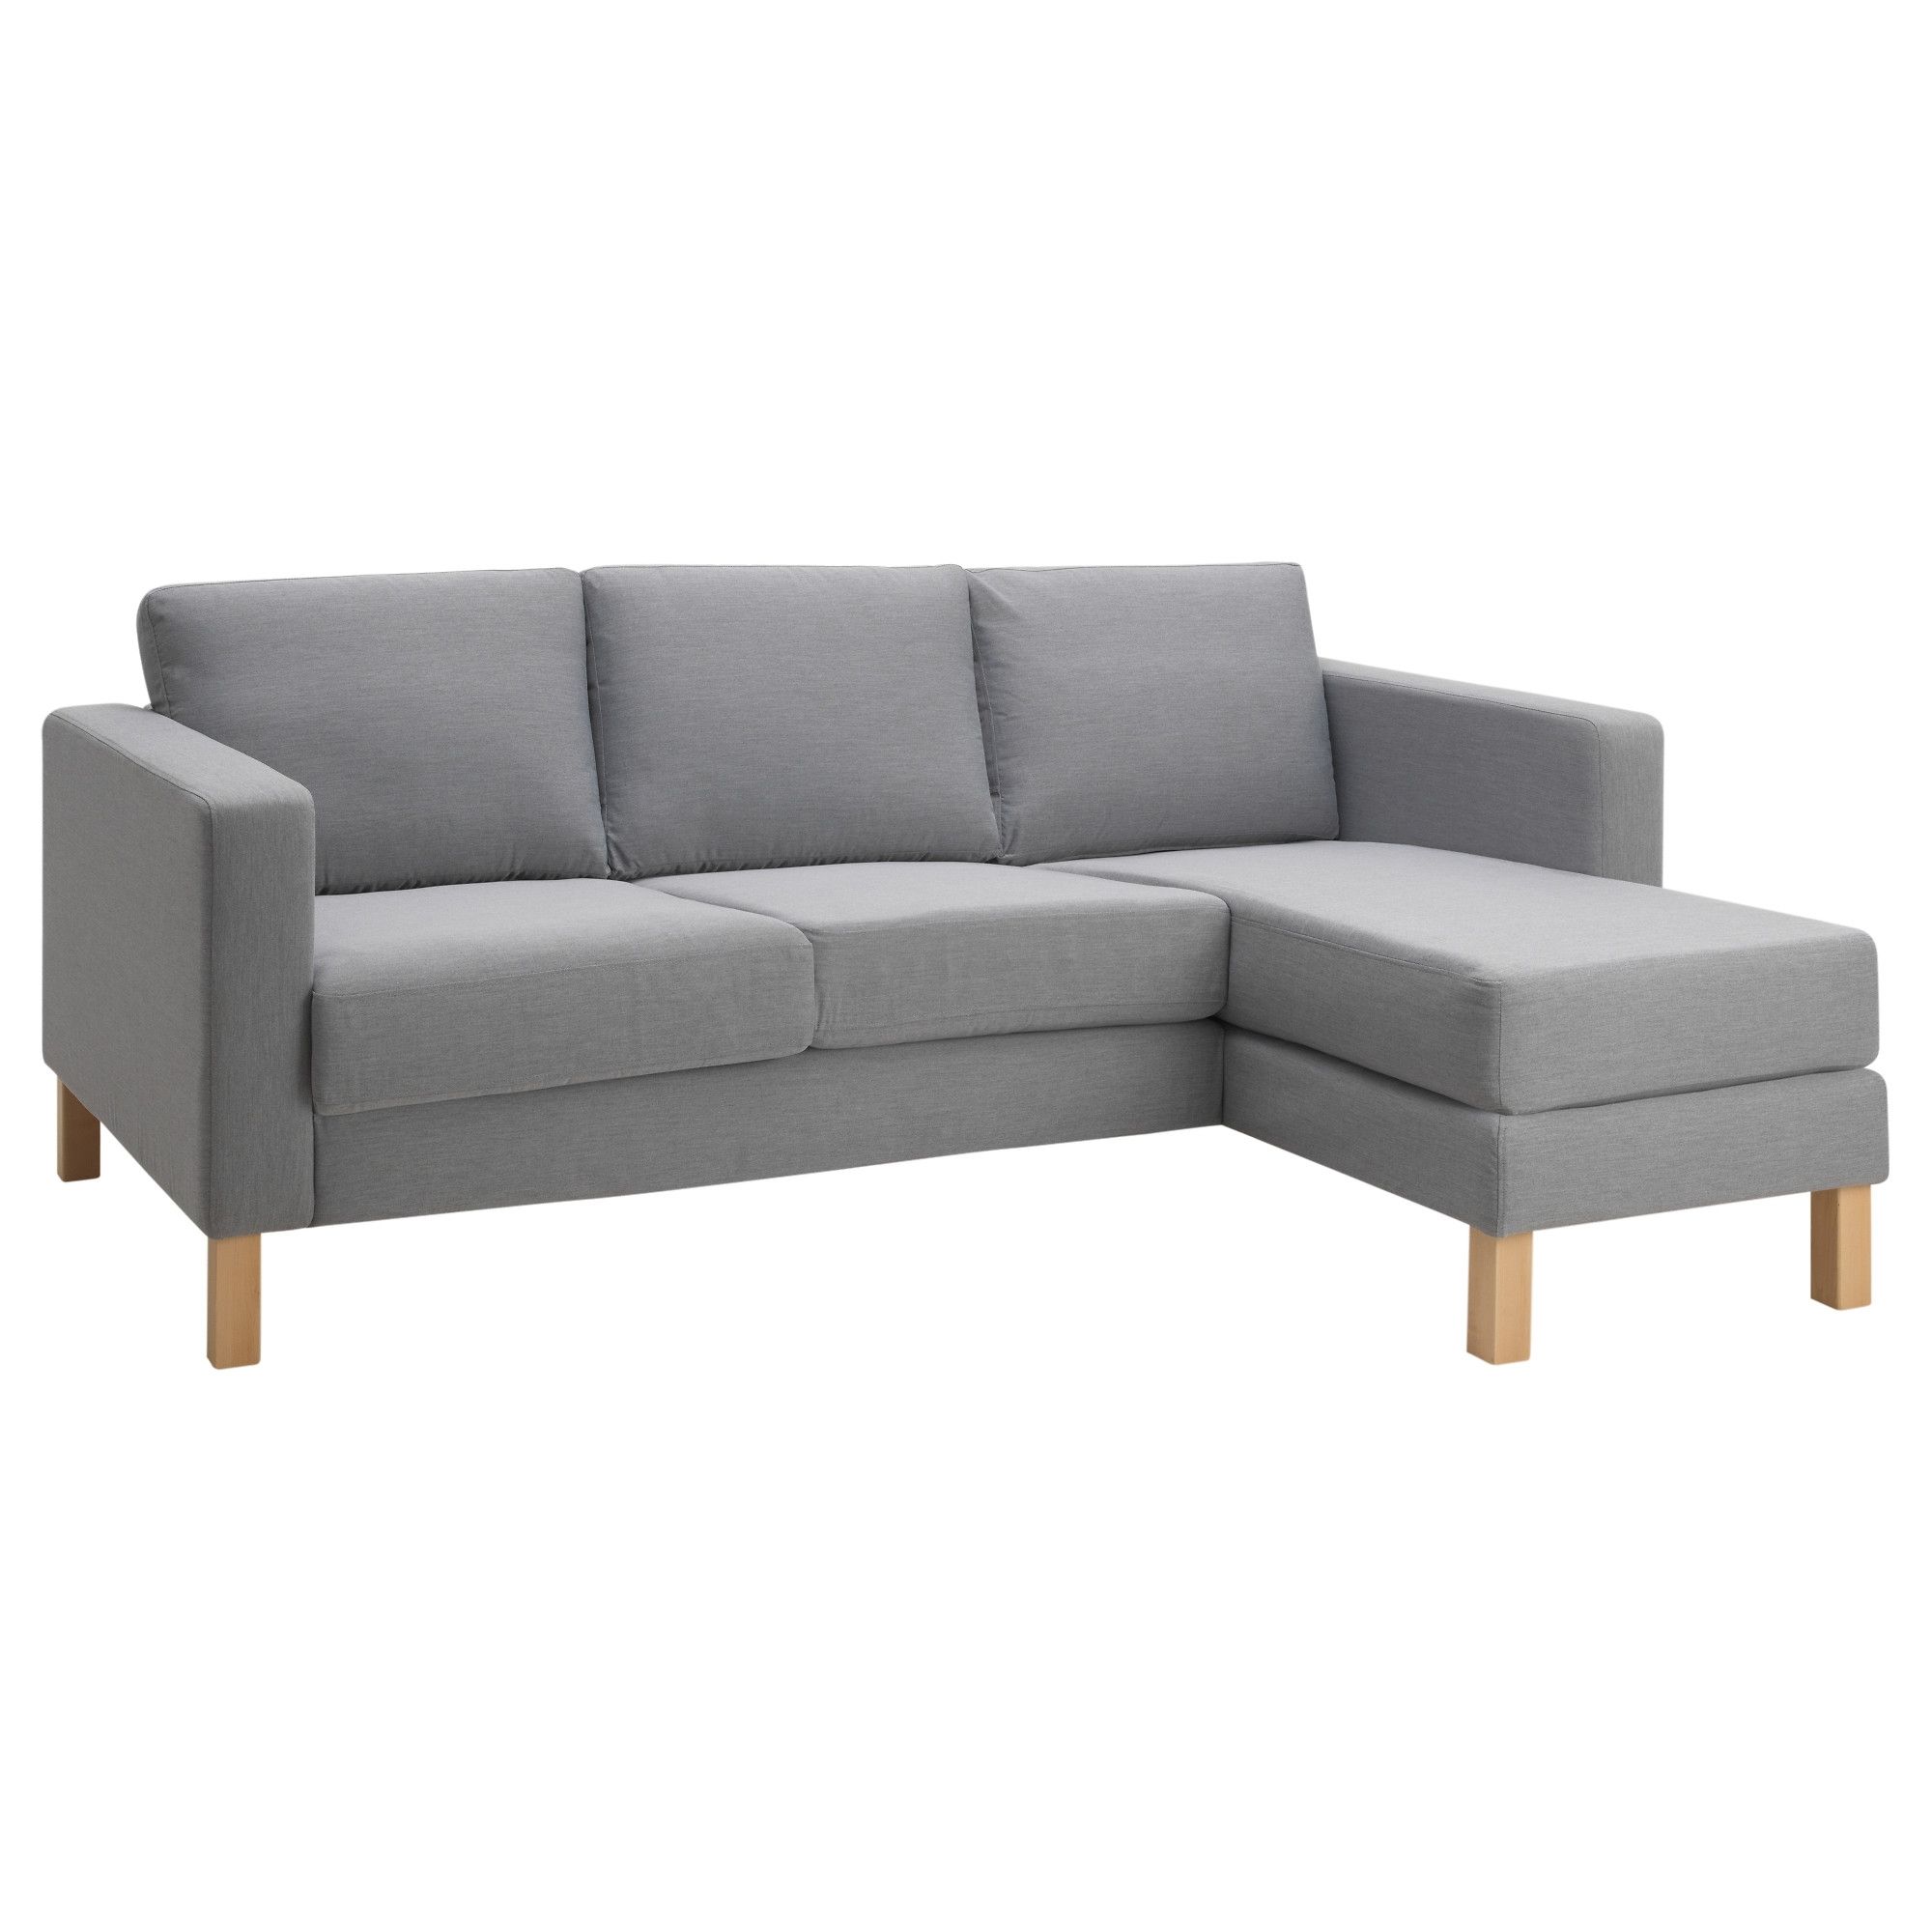 Karlstad Chaises For Most Up To Date Karlstad Compact 2 Seat Sofa W Chaise Lounge – Isunda Grey – Ikea (Photo 6 of 15)